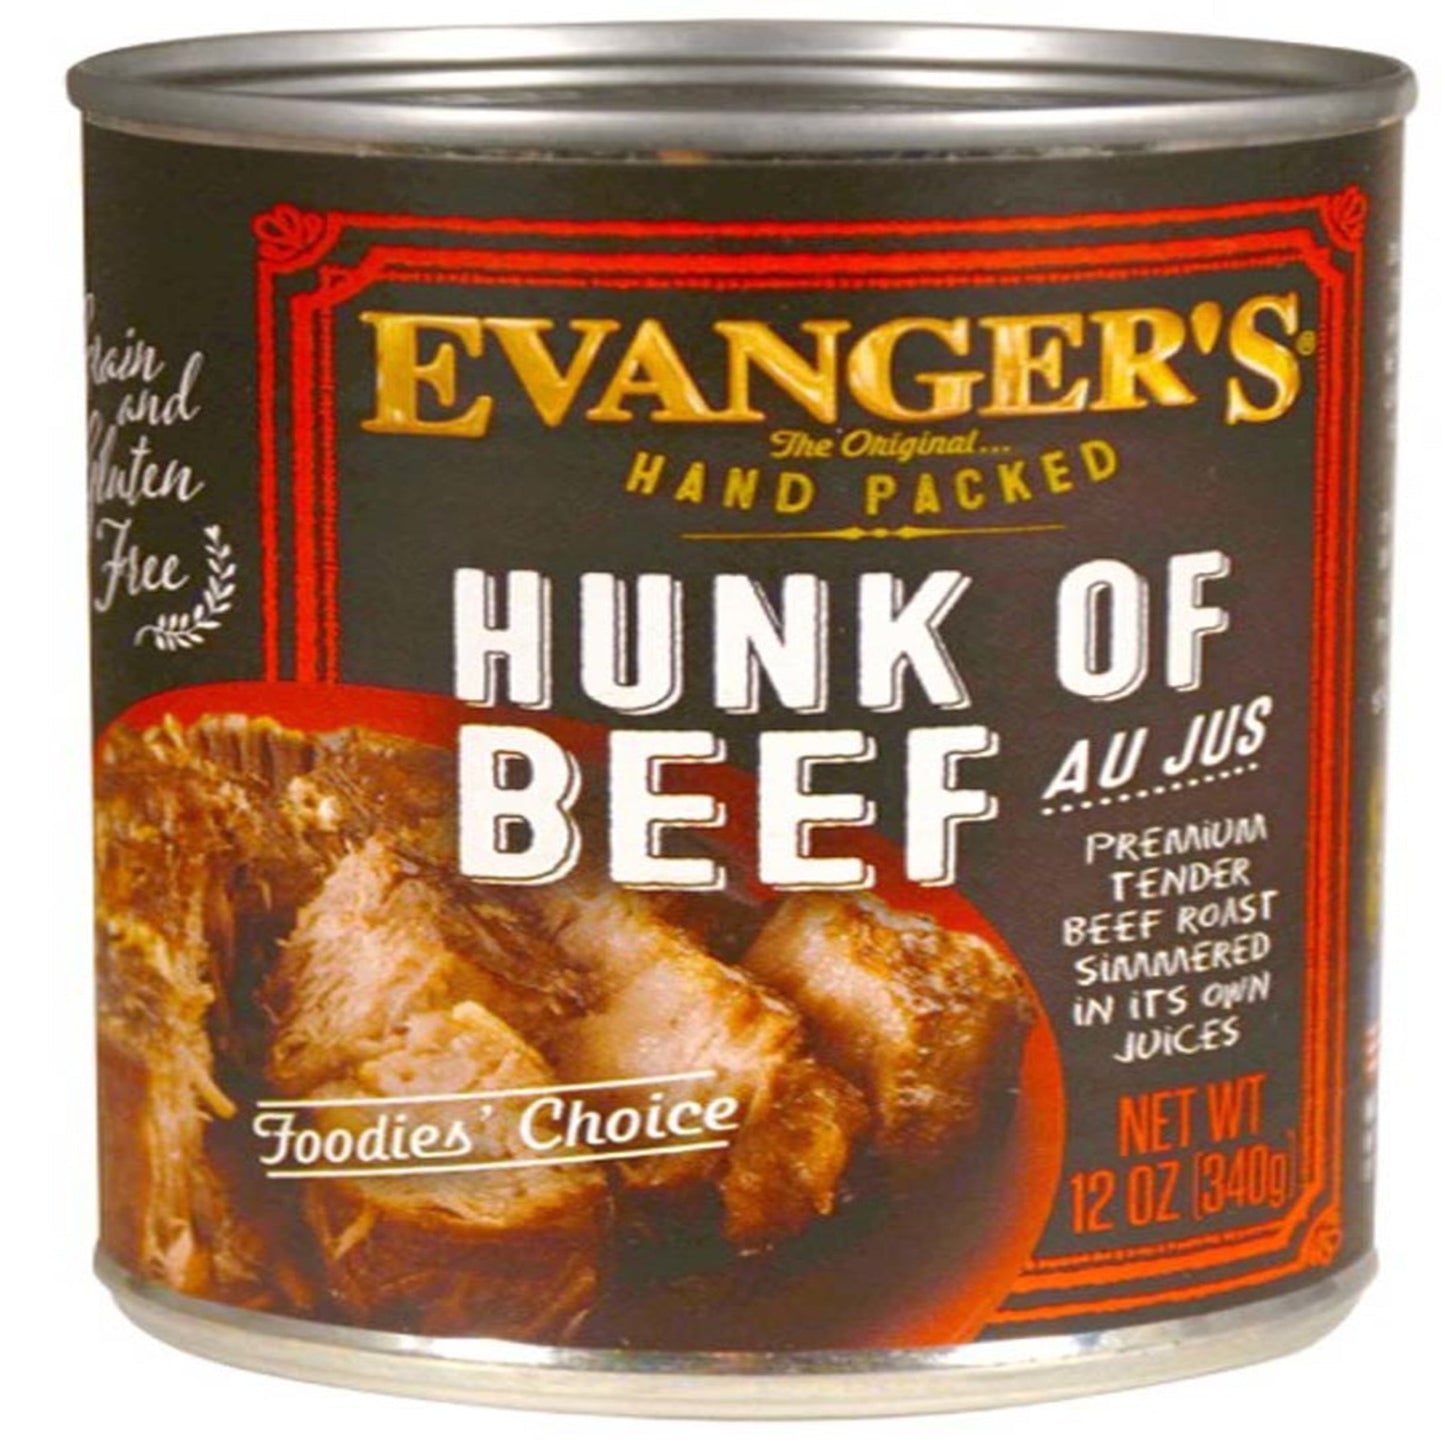 Evanger's Hand Packed Wet Dog Food Hunk of Beef 12oz. (Case of 12)